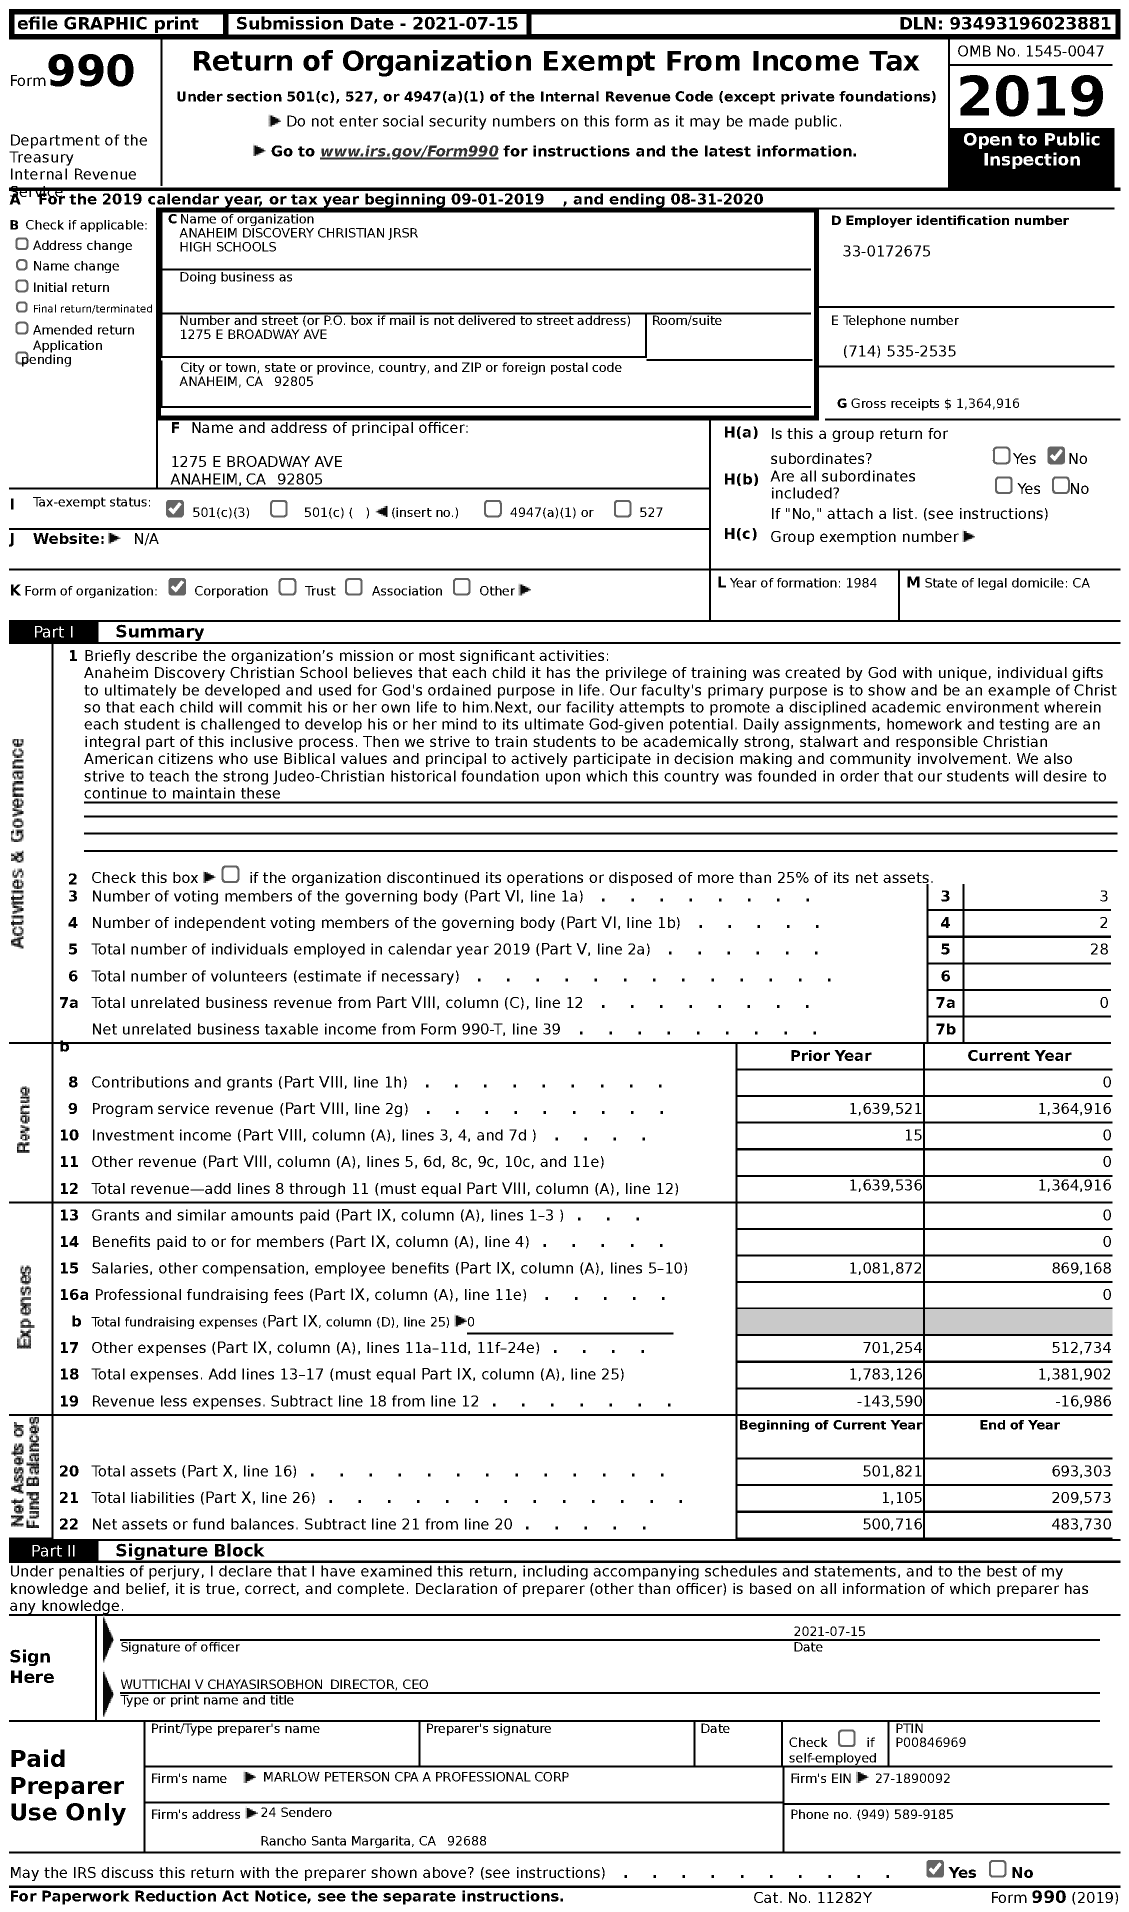 Image of first page of 2019 Form 990 for Anaheim Discovery Christian JRSR High Schools